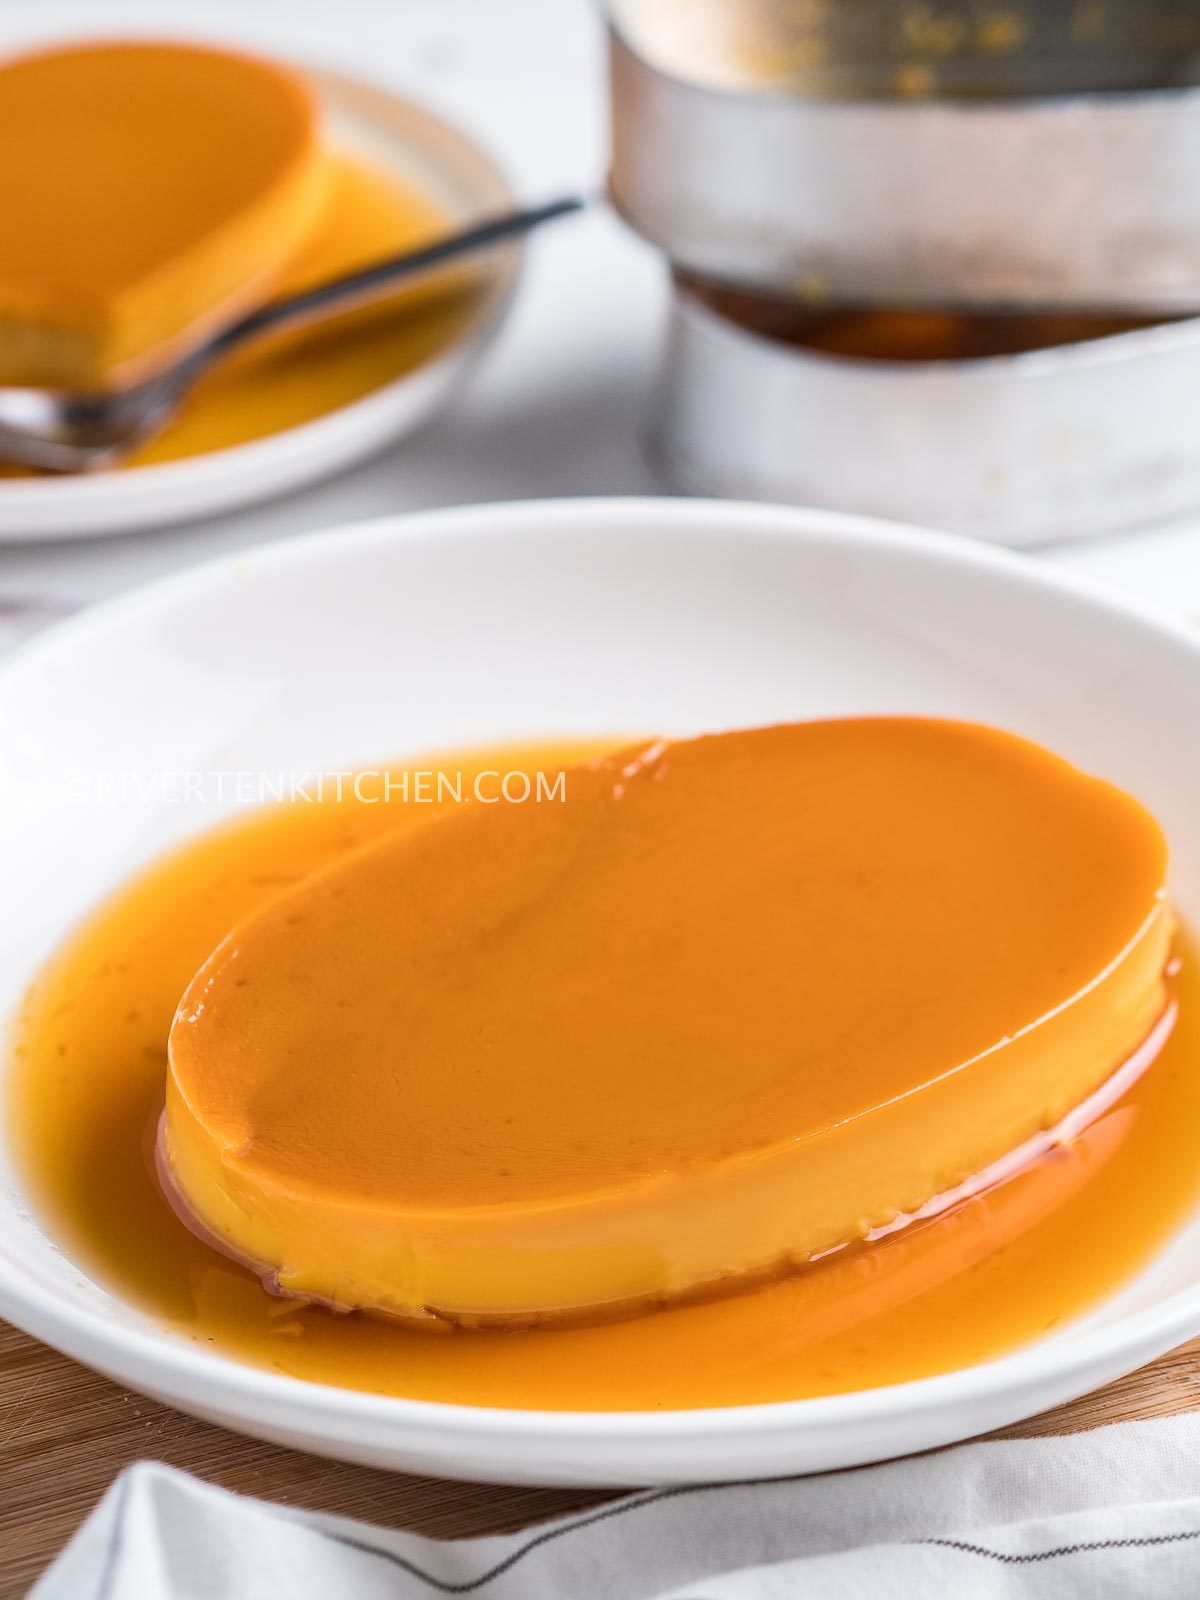 Flan made of egg yolks with caramel syrup